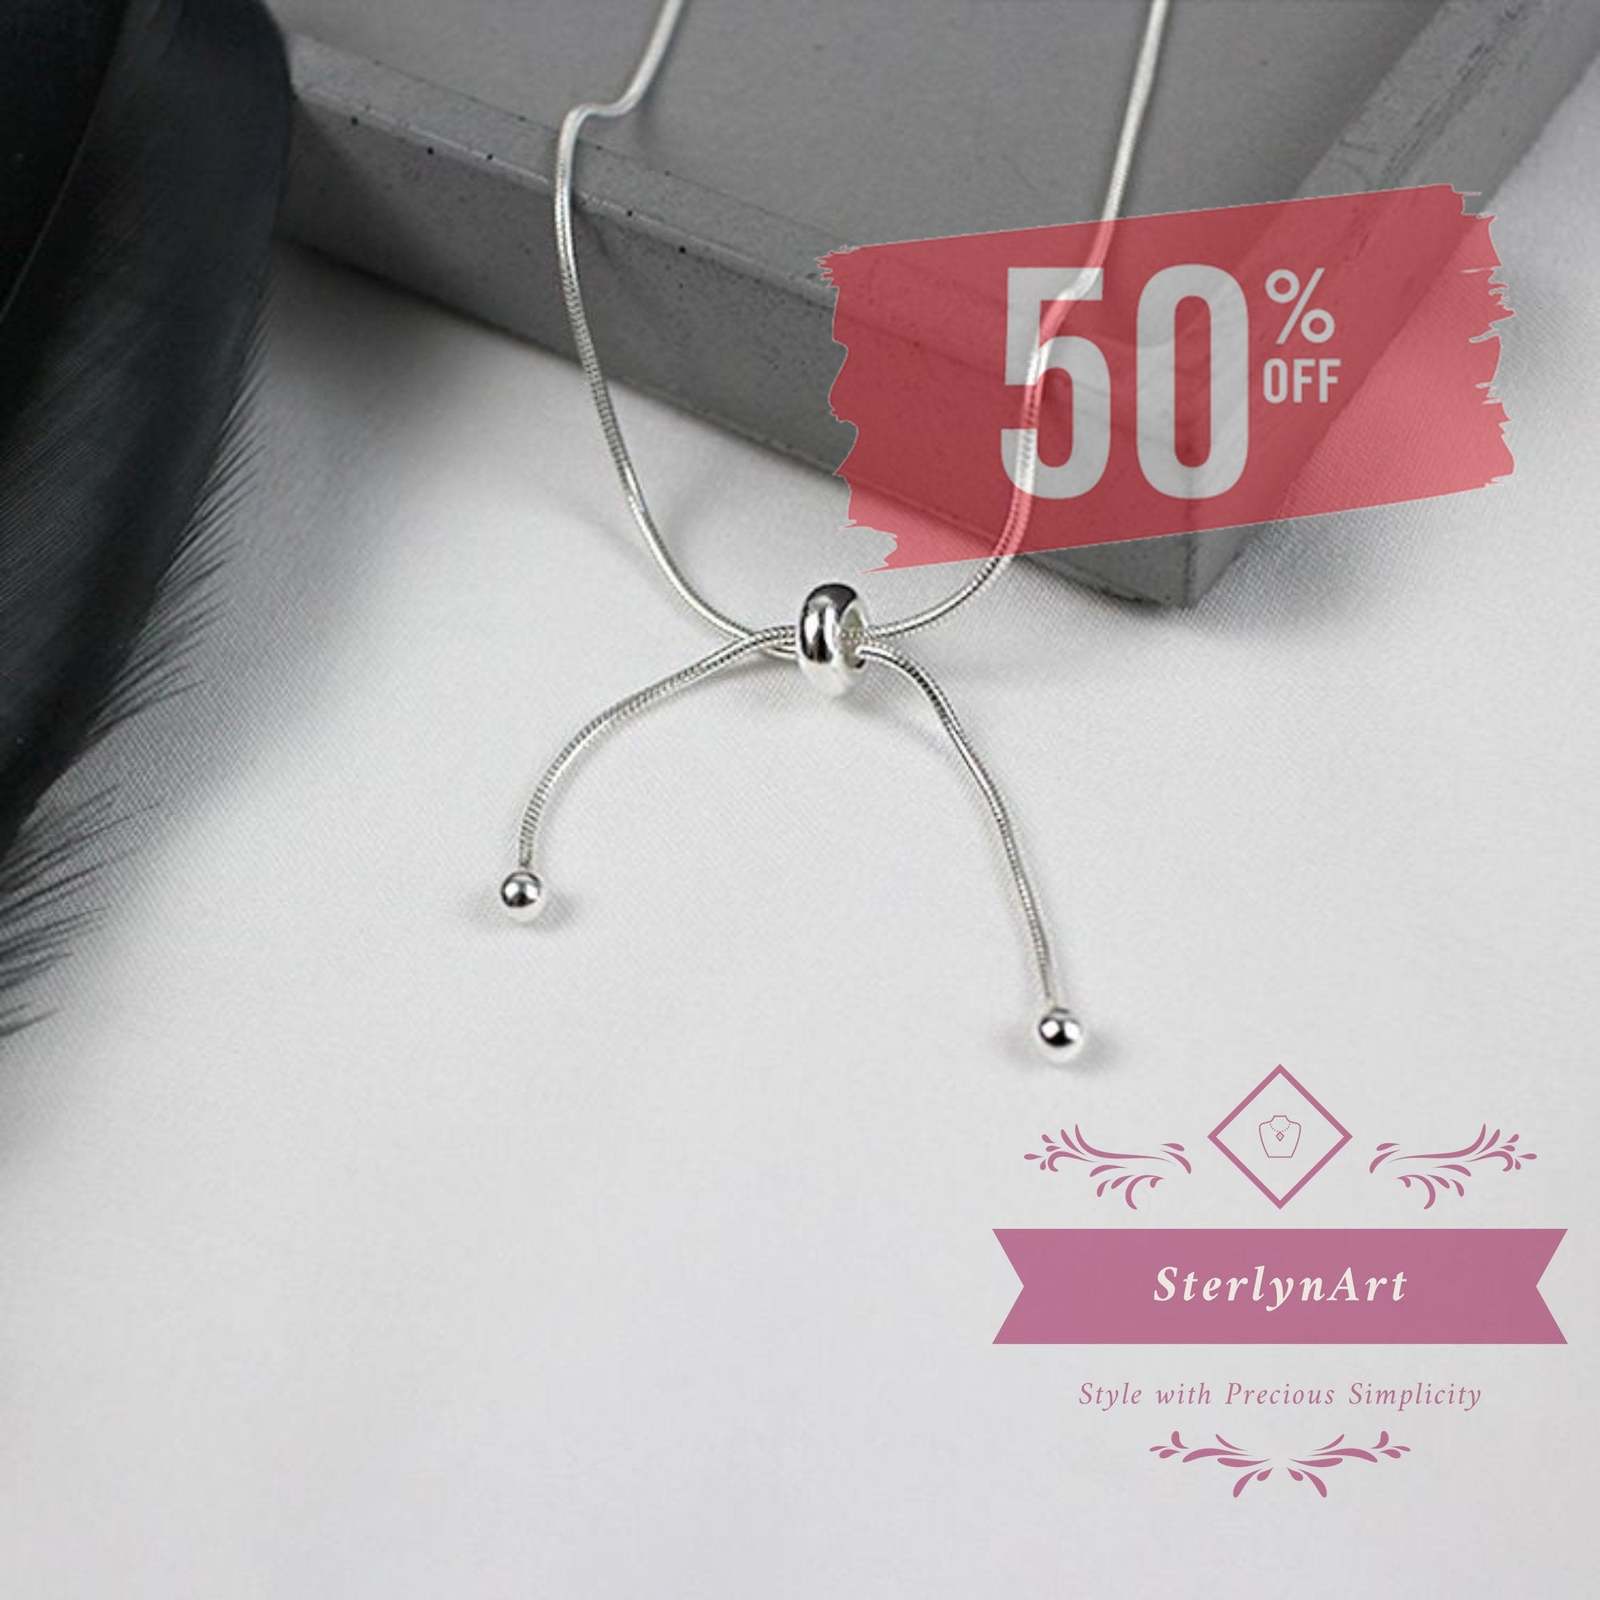 Fashion Snakee Chain Bead • 925 Sterling Silver Necklace for Women • Handcrafted